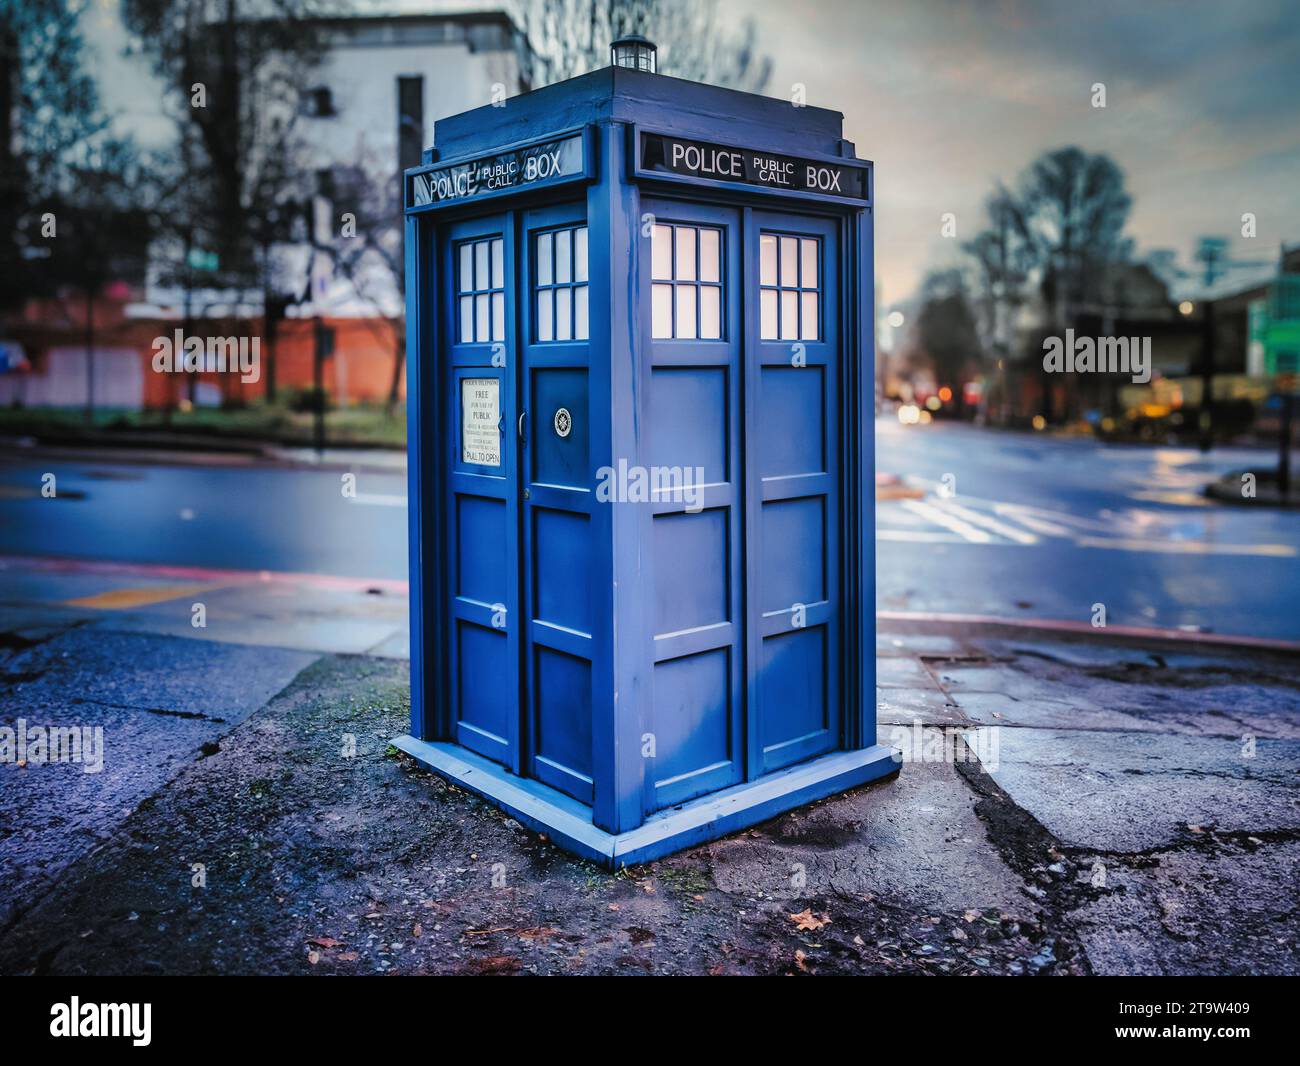 Doctor Who Replica TARDIS, 1960s-style London police box on Camden Road, used as tool shed for The Kindness Offensive Charity Stock Photo